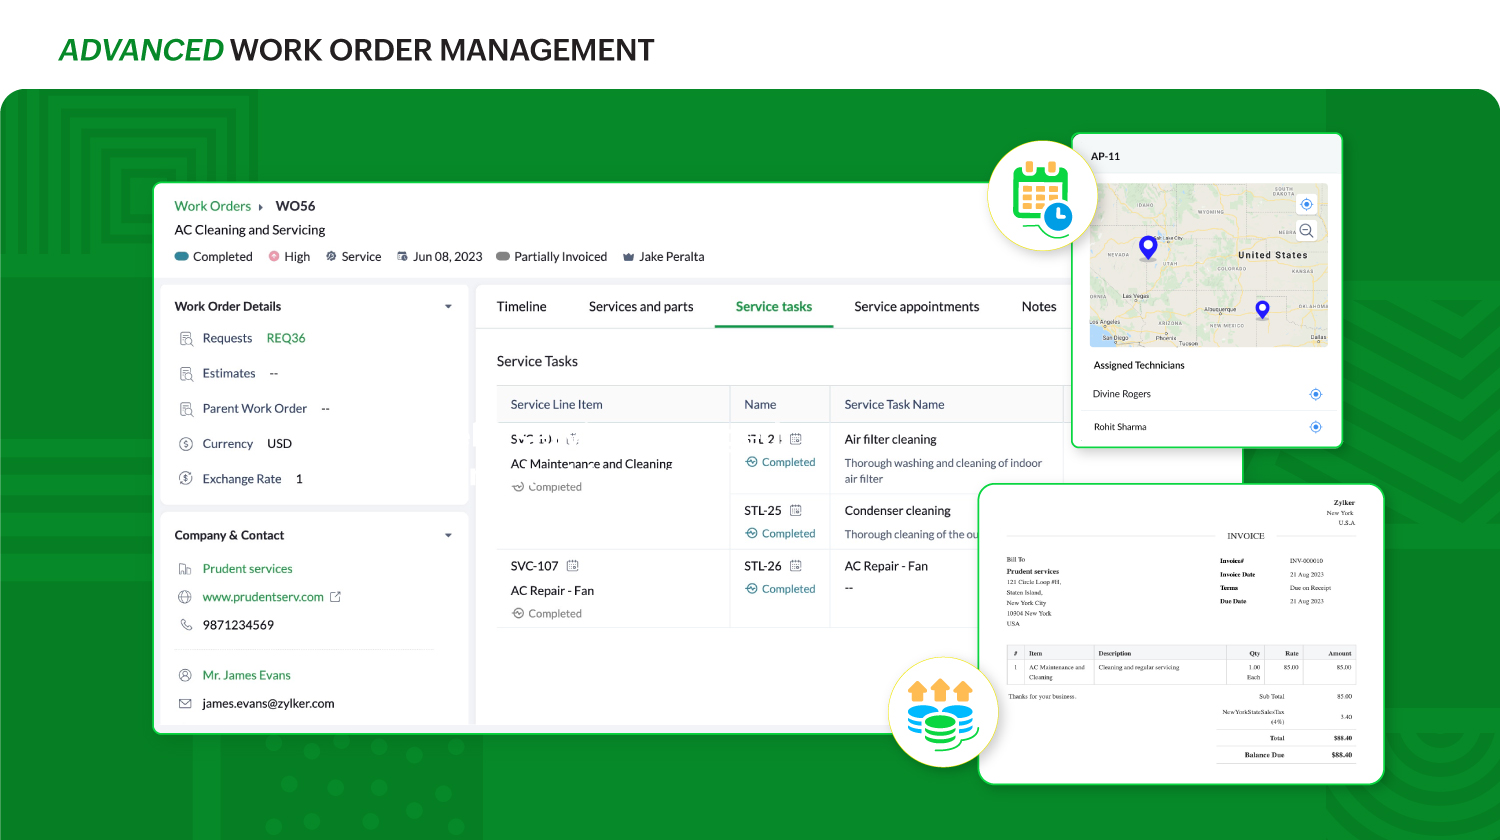 Zoho FSM optimizes work order management. Receive service requests, create and send estimates, covert it to a work order and schedule appointments and raise invoices.